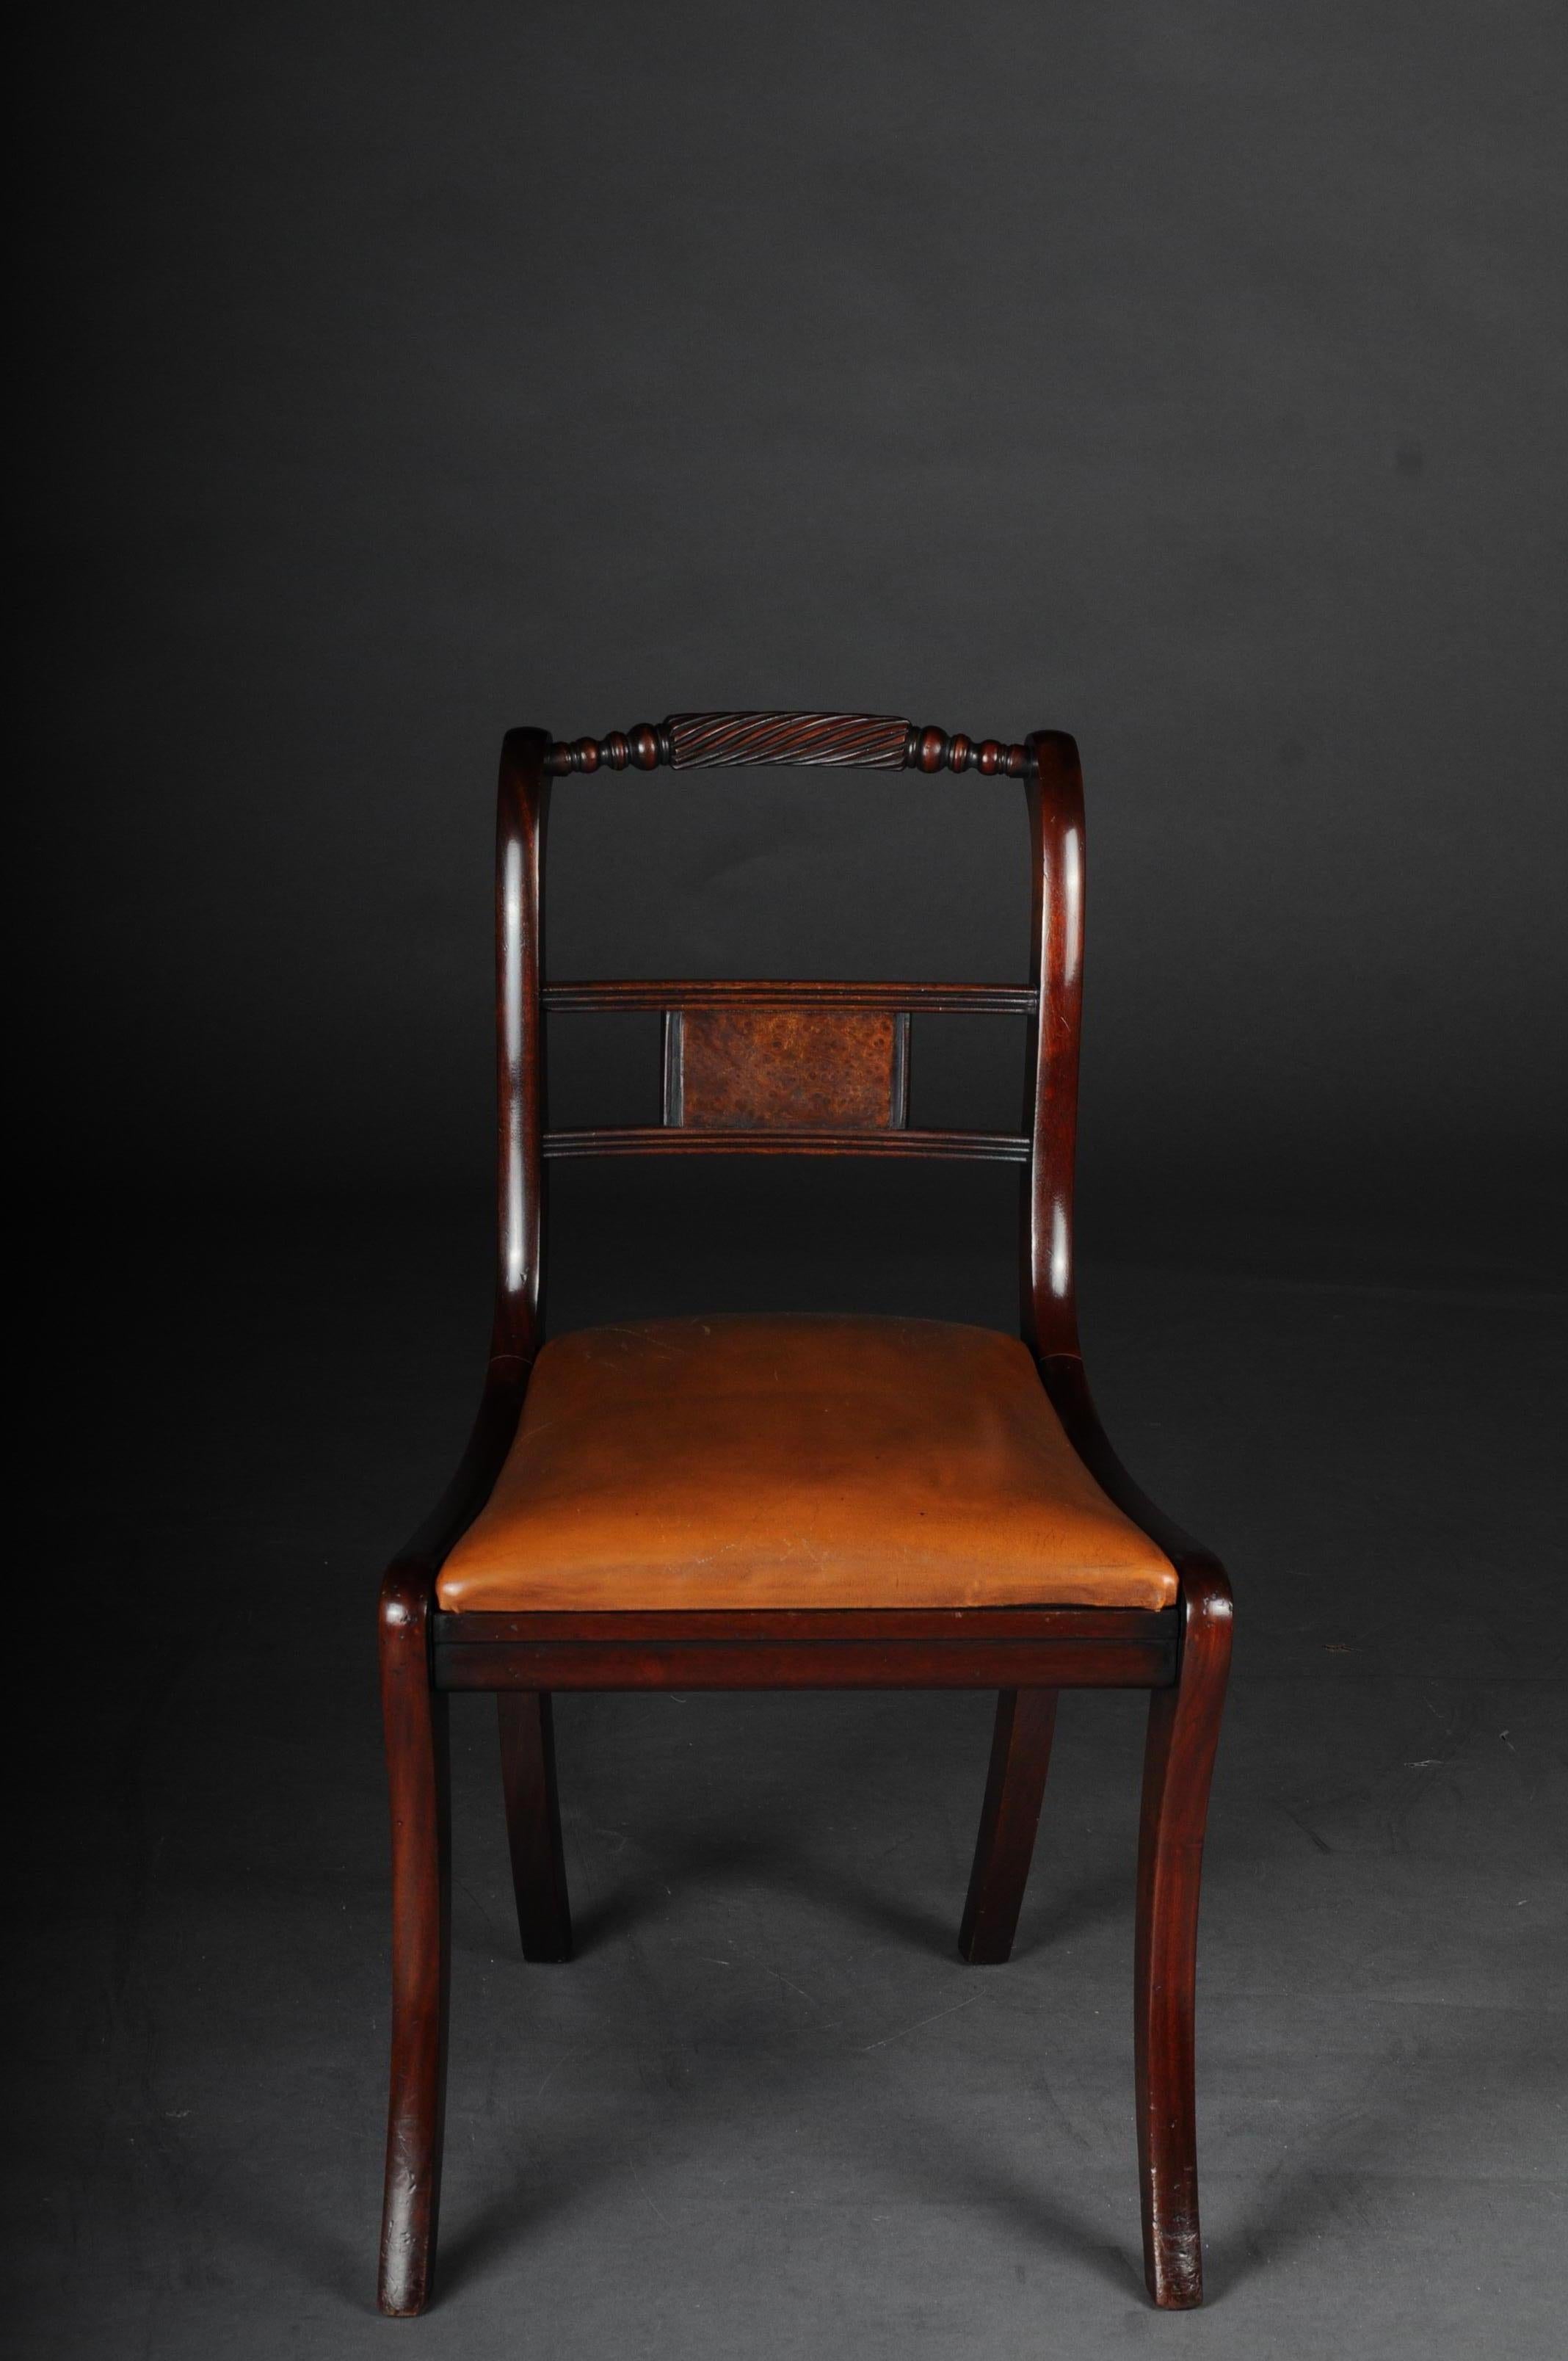 Set of 6 Regency English chairs or armchairs, 20th century

Solid mahogany wood. England Regency 20th century. Curved and partly turned backrest.
Leather-covered seat on saber-shaped legs. Set of 6 chairs including 2 armchairs.
(C-163).